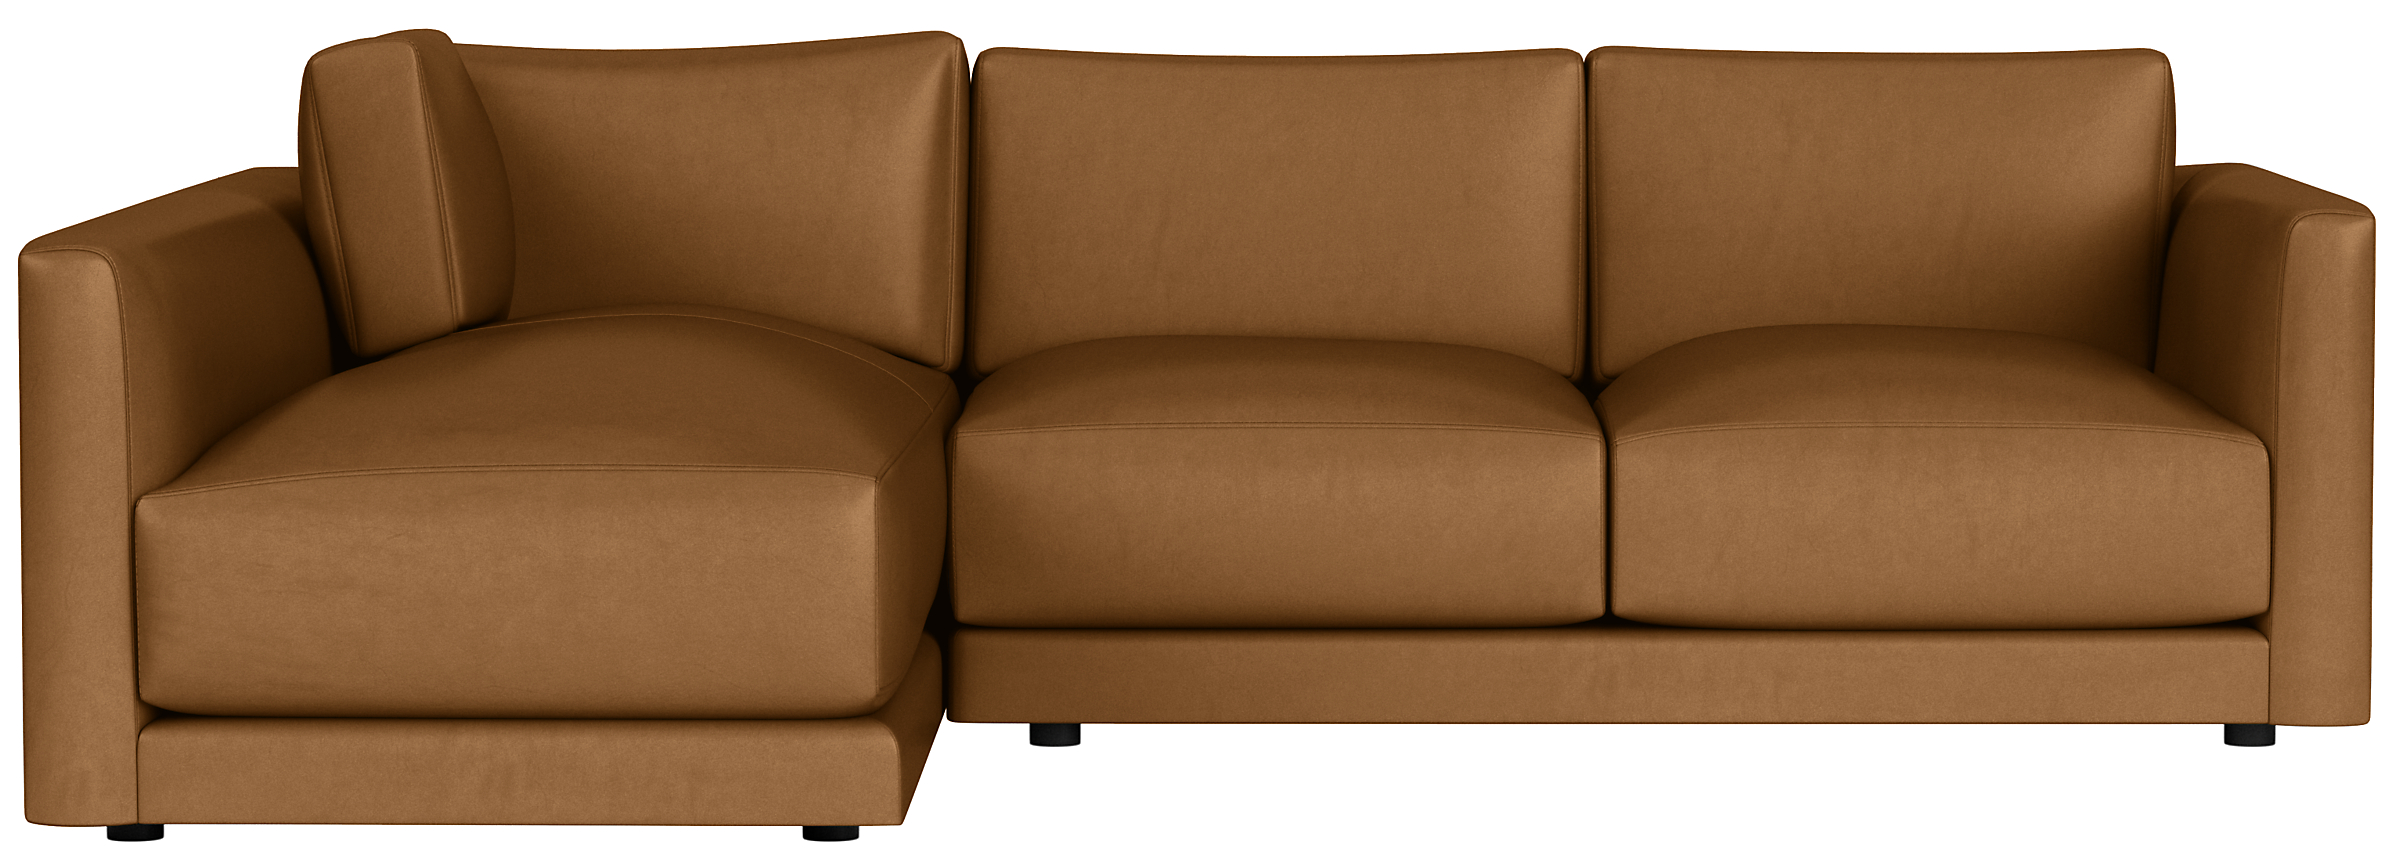 Clemens Leather Sofas with Chaise